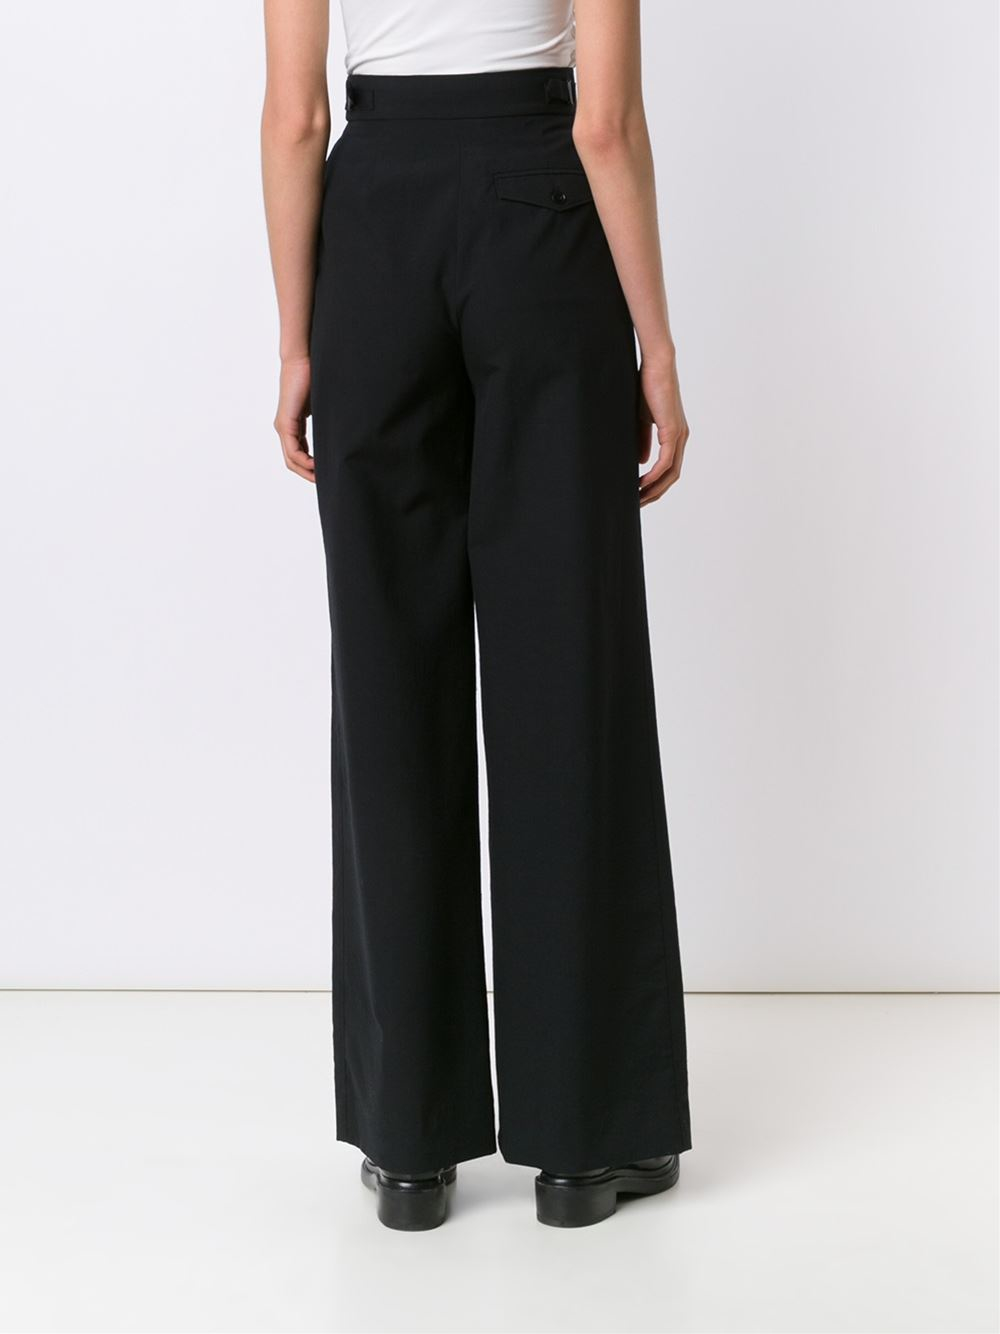 Lemaire Wool Pleated Palazzo Pants in Black - Lyst